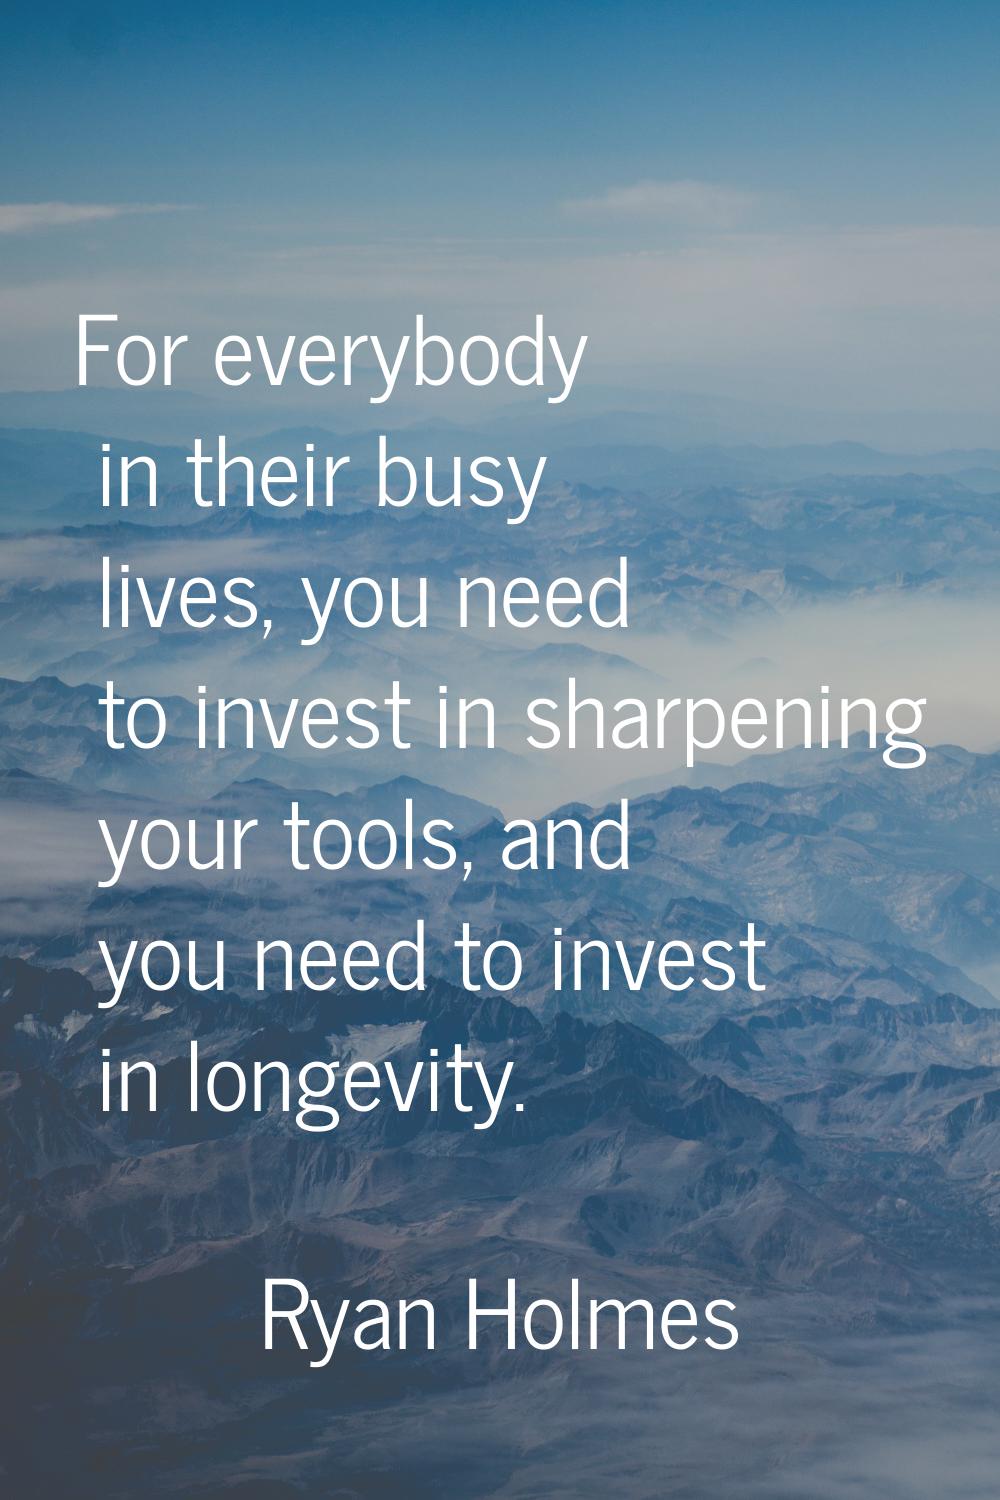 For everybody in their busy lives, you need to invest in sharpening your tools, and you need to inv